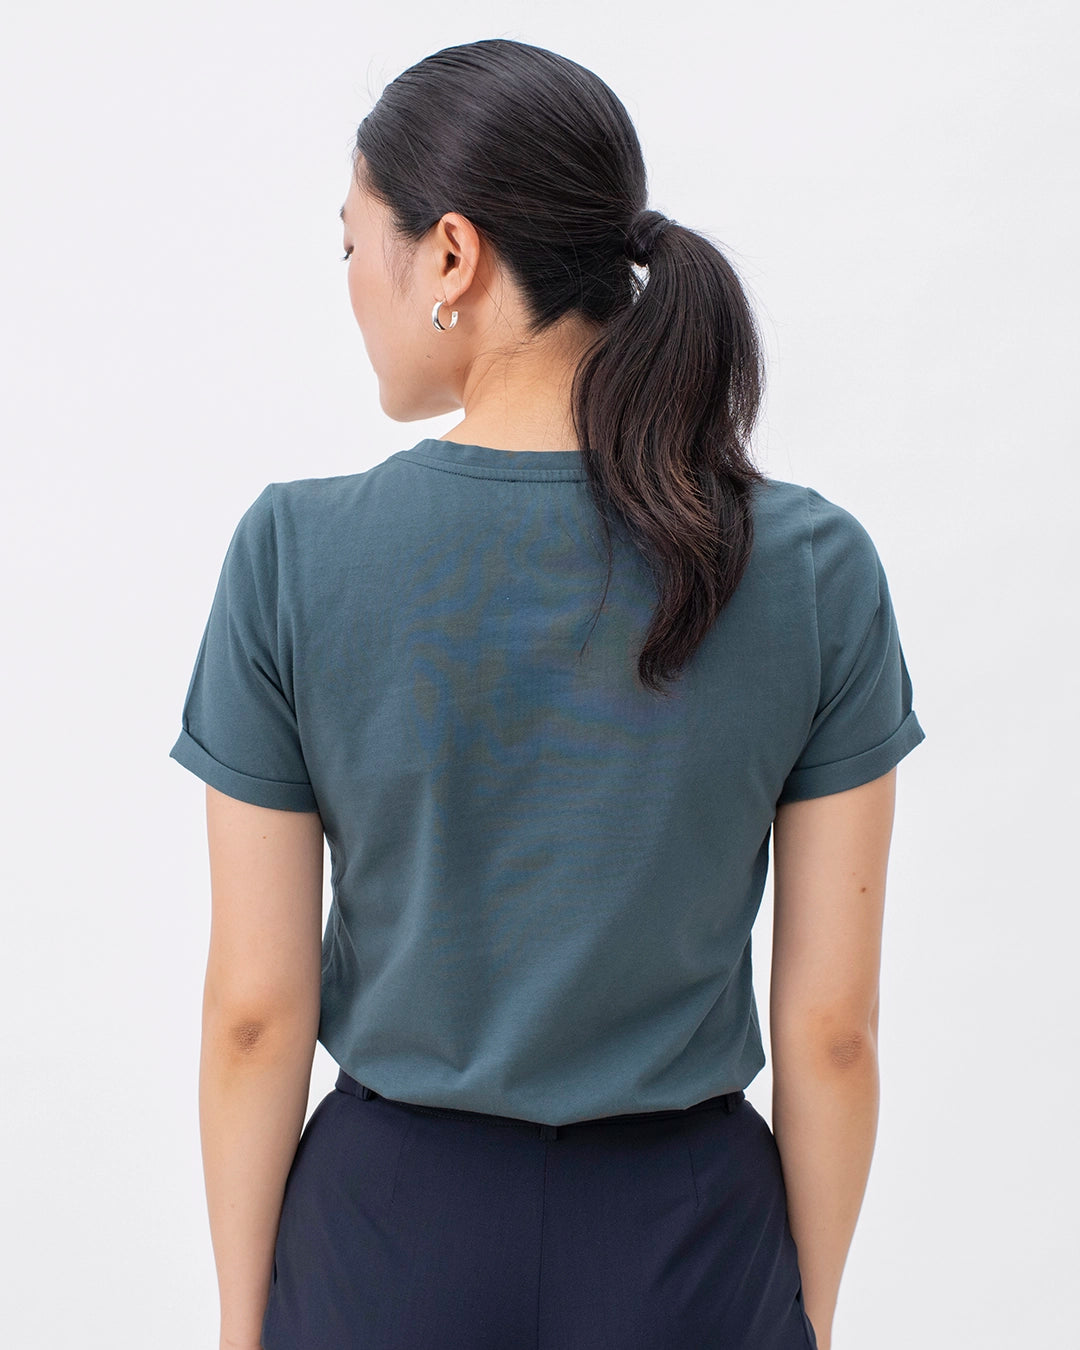 17h10_tshirt_tailleur_woman_green_cotton_organic_bots_color_comfortable_natural_material_ethic_decontract_tailleur